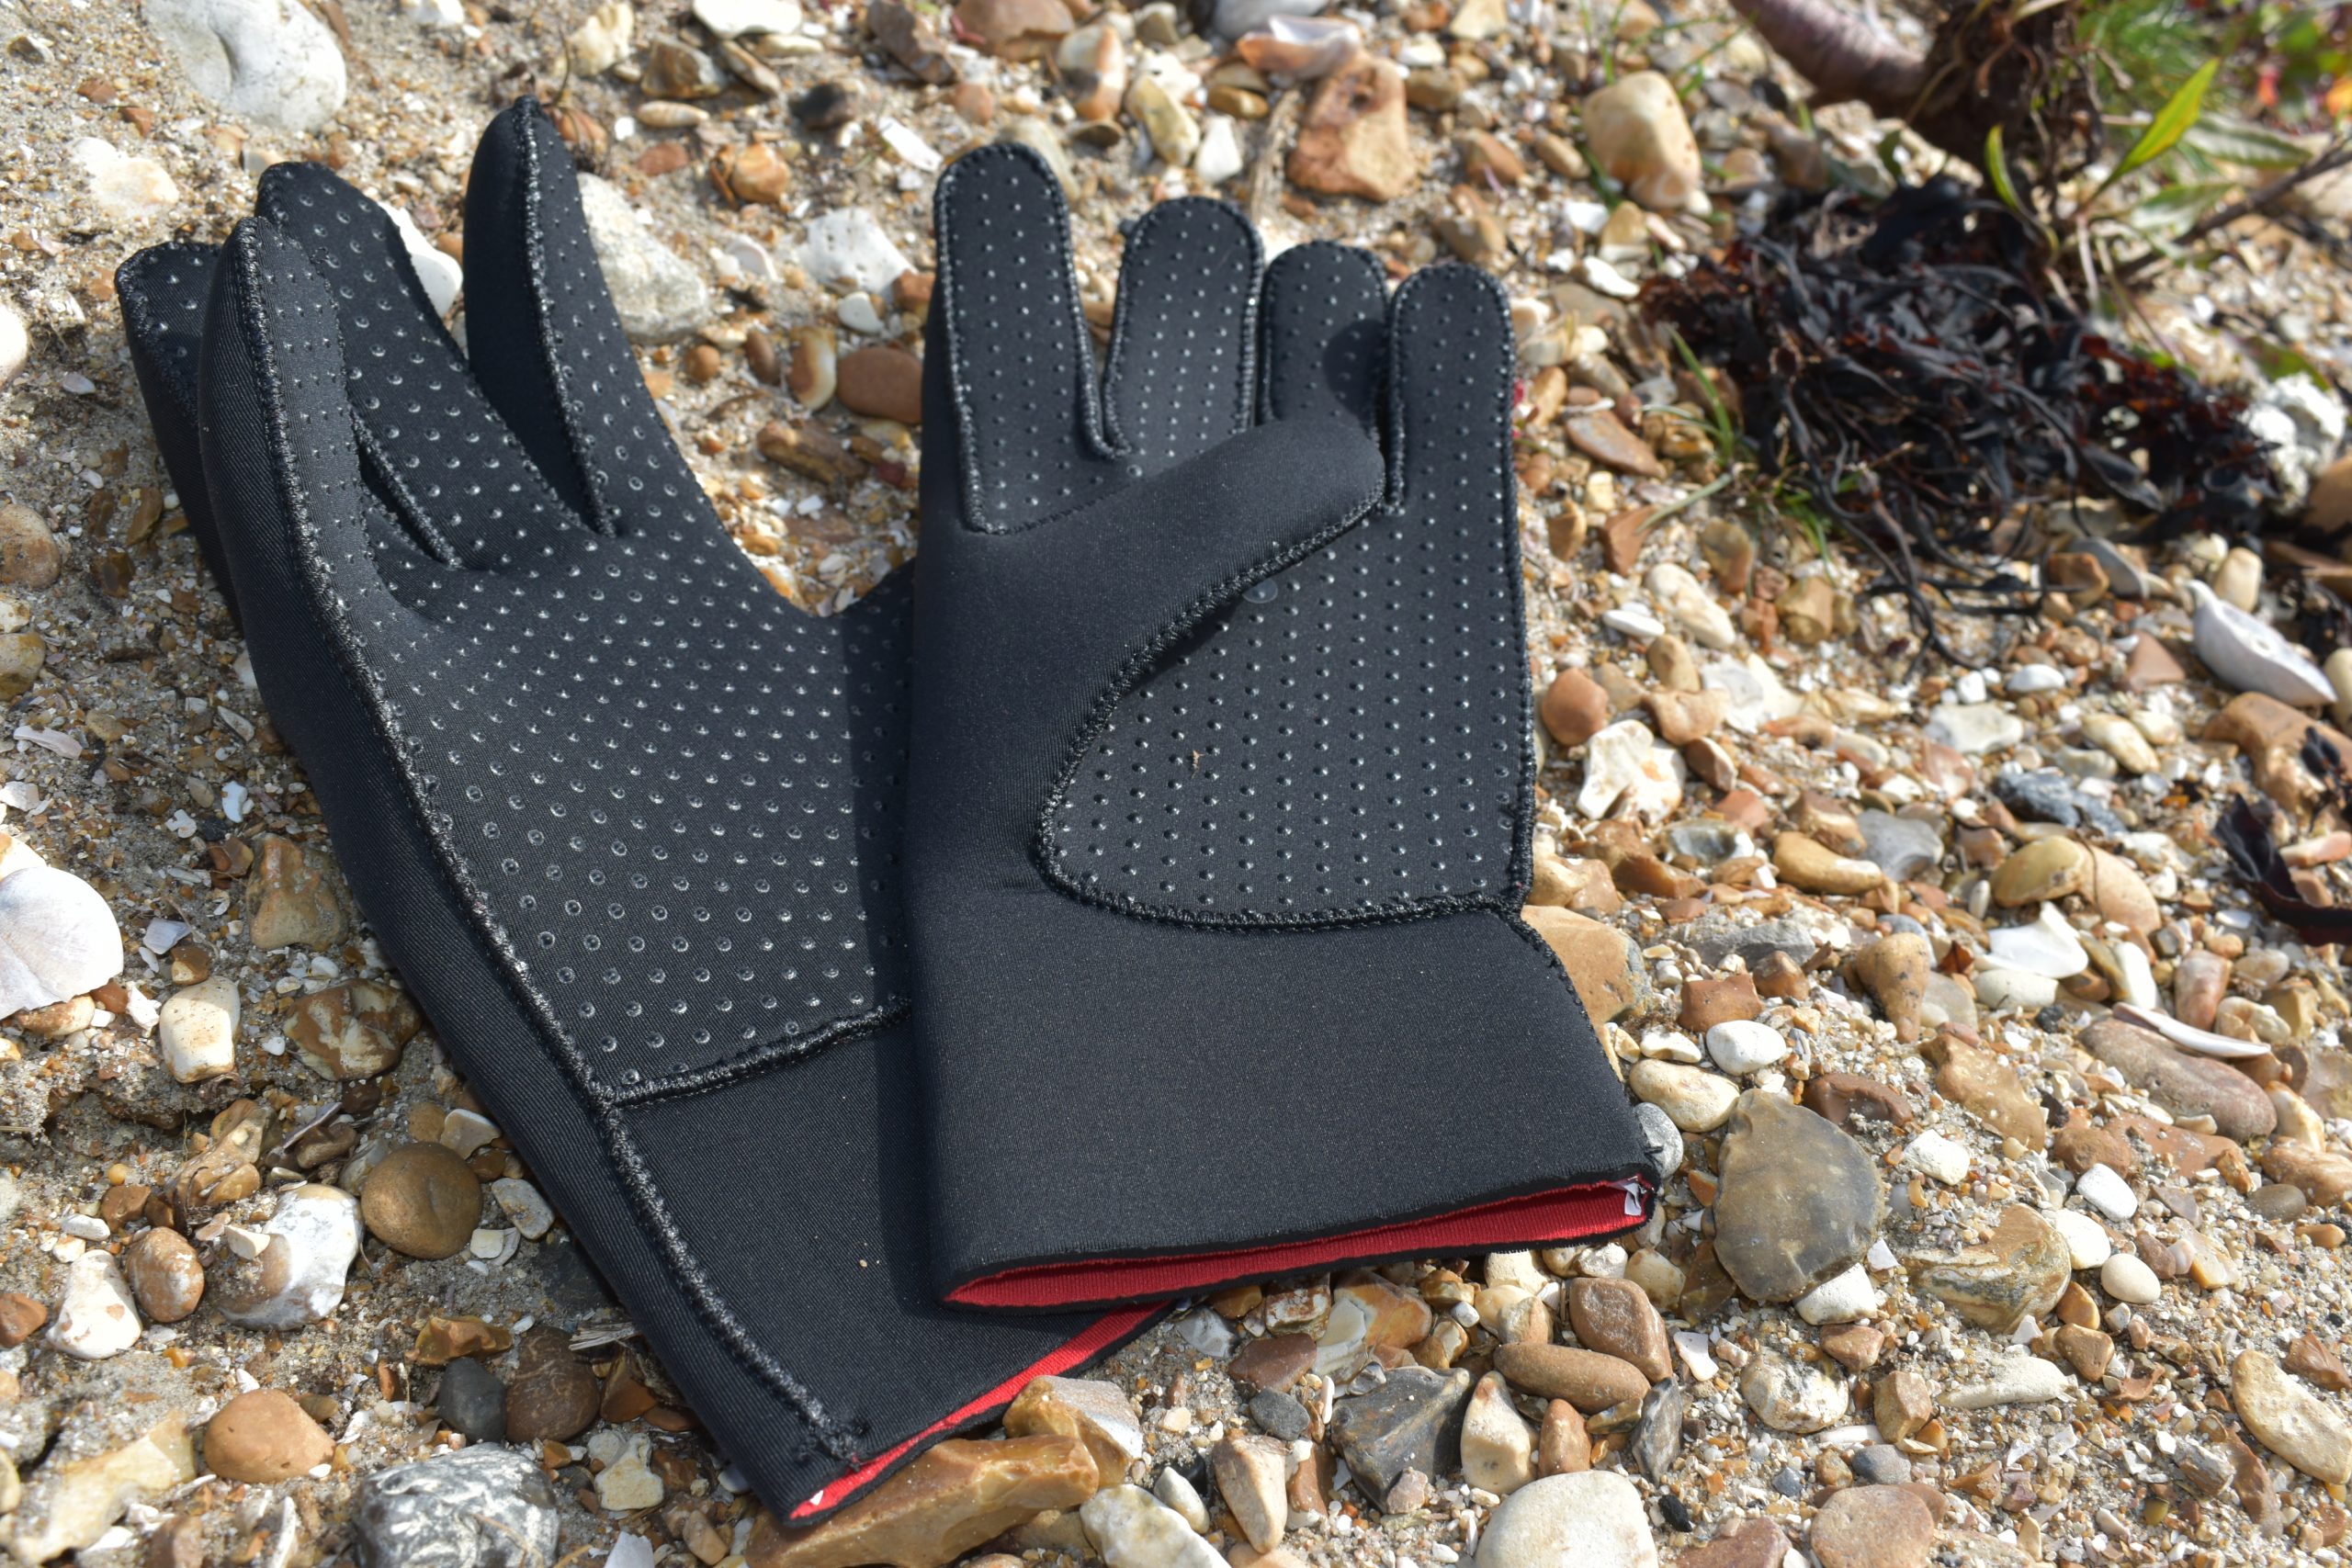 3mm wetsuit gloves Titanium XStretch all sizes available warm/grippy palm 